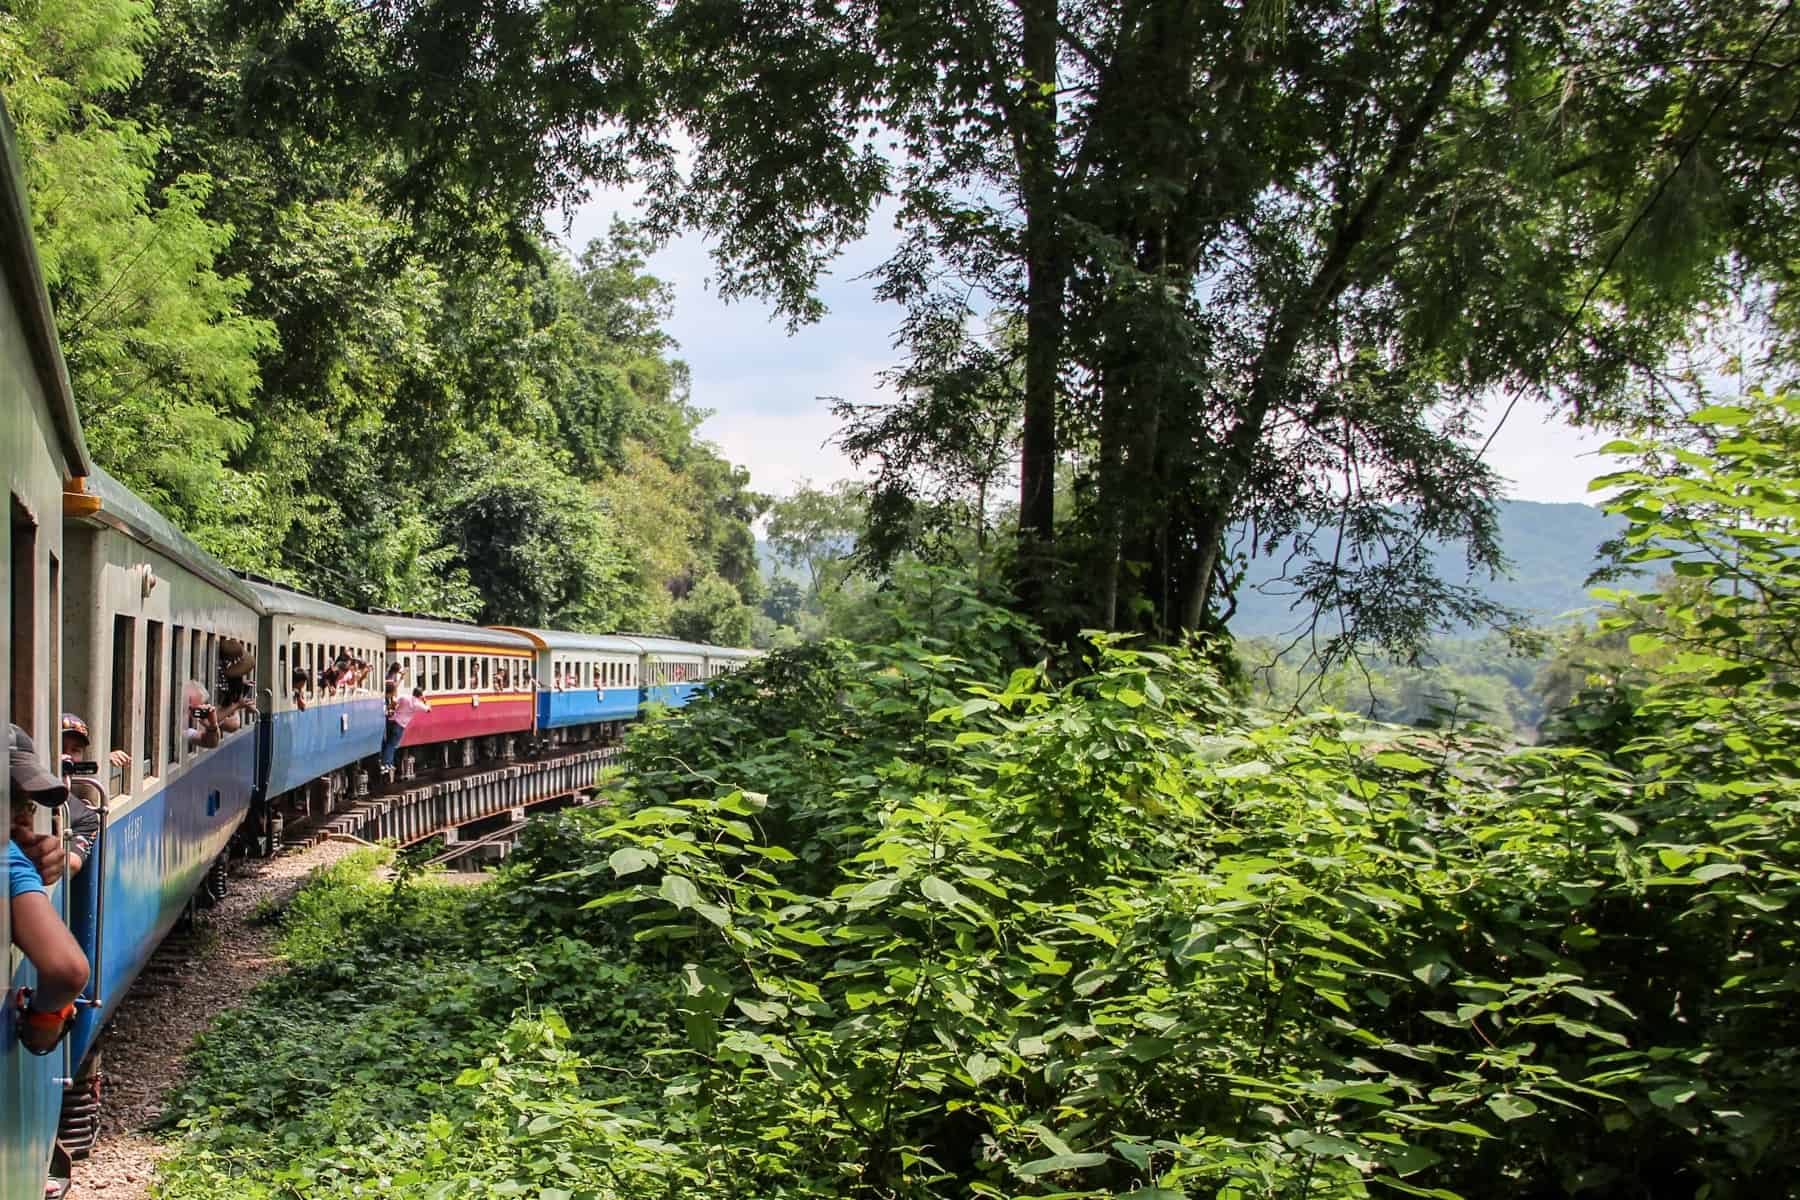 Blue, white and pink train carriages curve around a bend through the jungle green of Kanchanaburi, Thailand